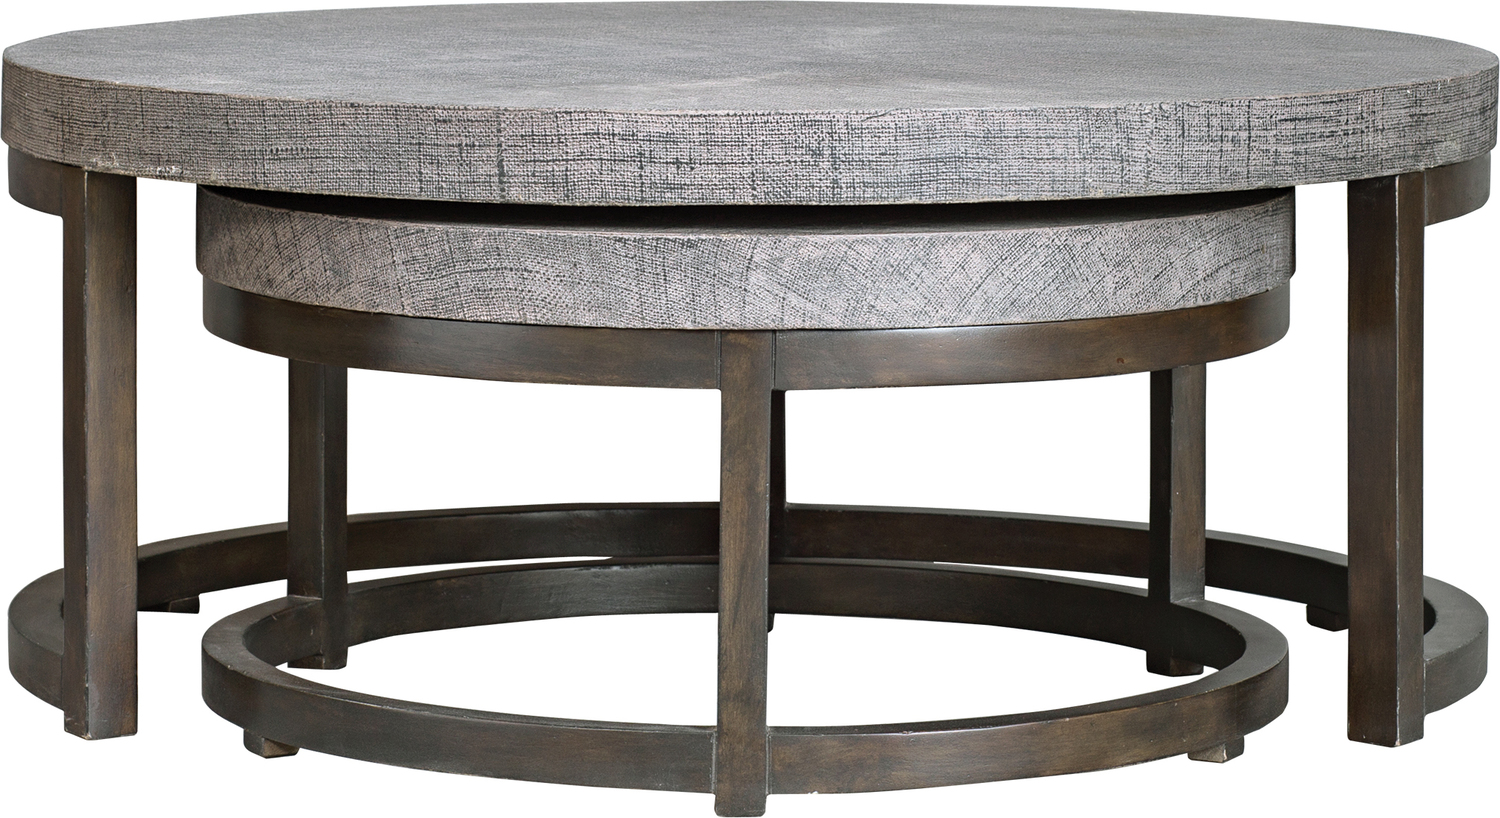 small rectangular side table Uttermost Accent & End Tables Offering Versatile Function With Modern Influences, This Duo Features Burlap Wrapped Tops Heavily Glazed In A Taupe Wash, With Solid Hardwood Bases Finished In A Hand Rubbed Black Coffee. Small Table Is 15"H.